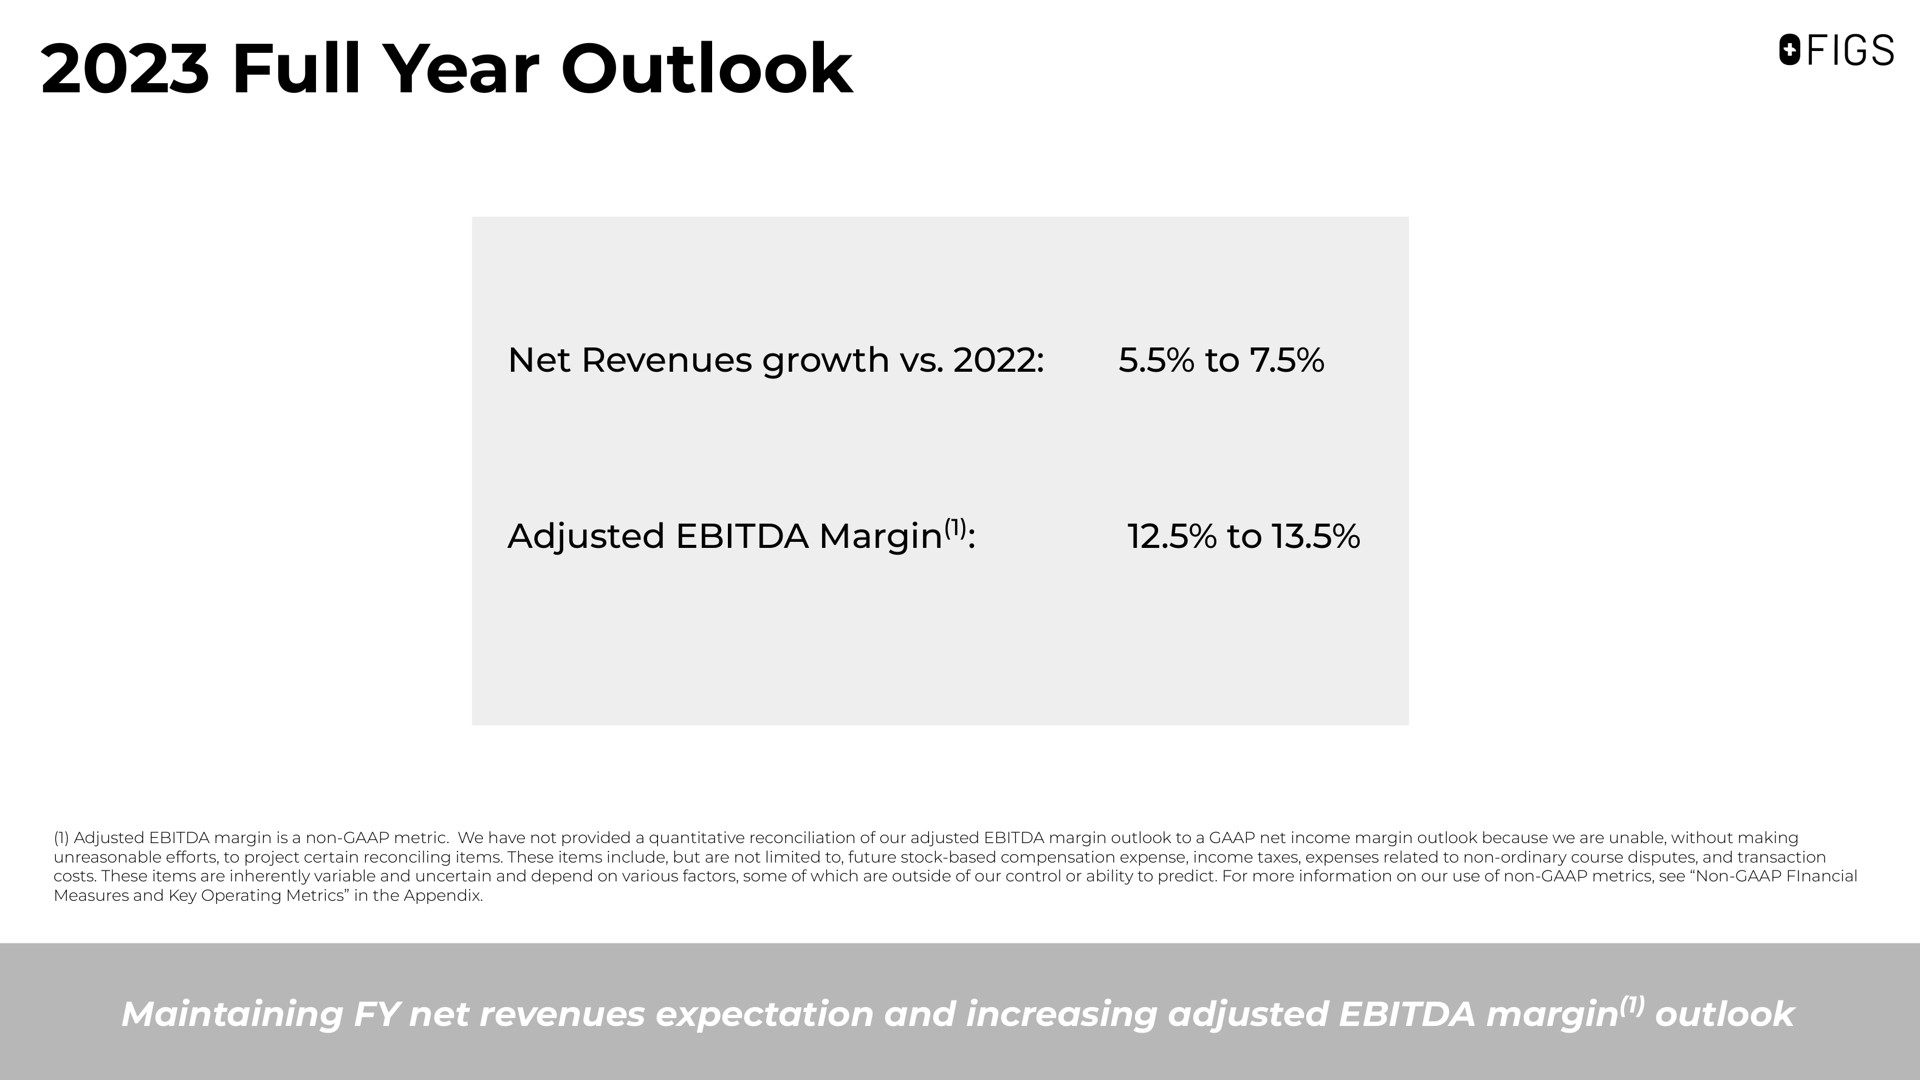 full year outlook net revenues growth to adjusted margin to maintaining net revenues expectation and increasing adjusted margin outlook | FIGS